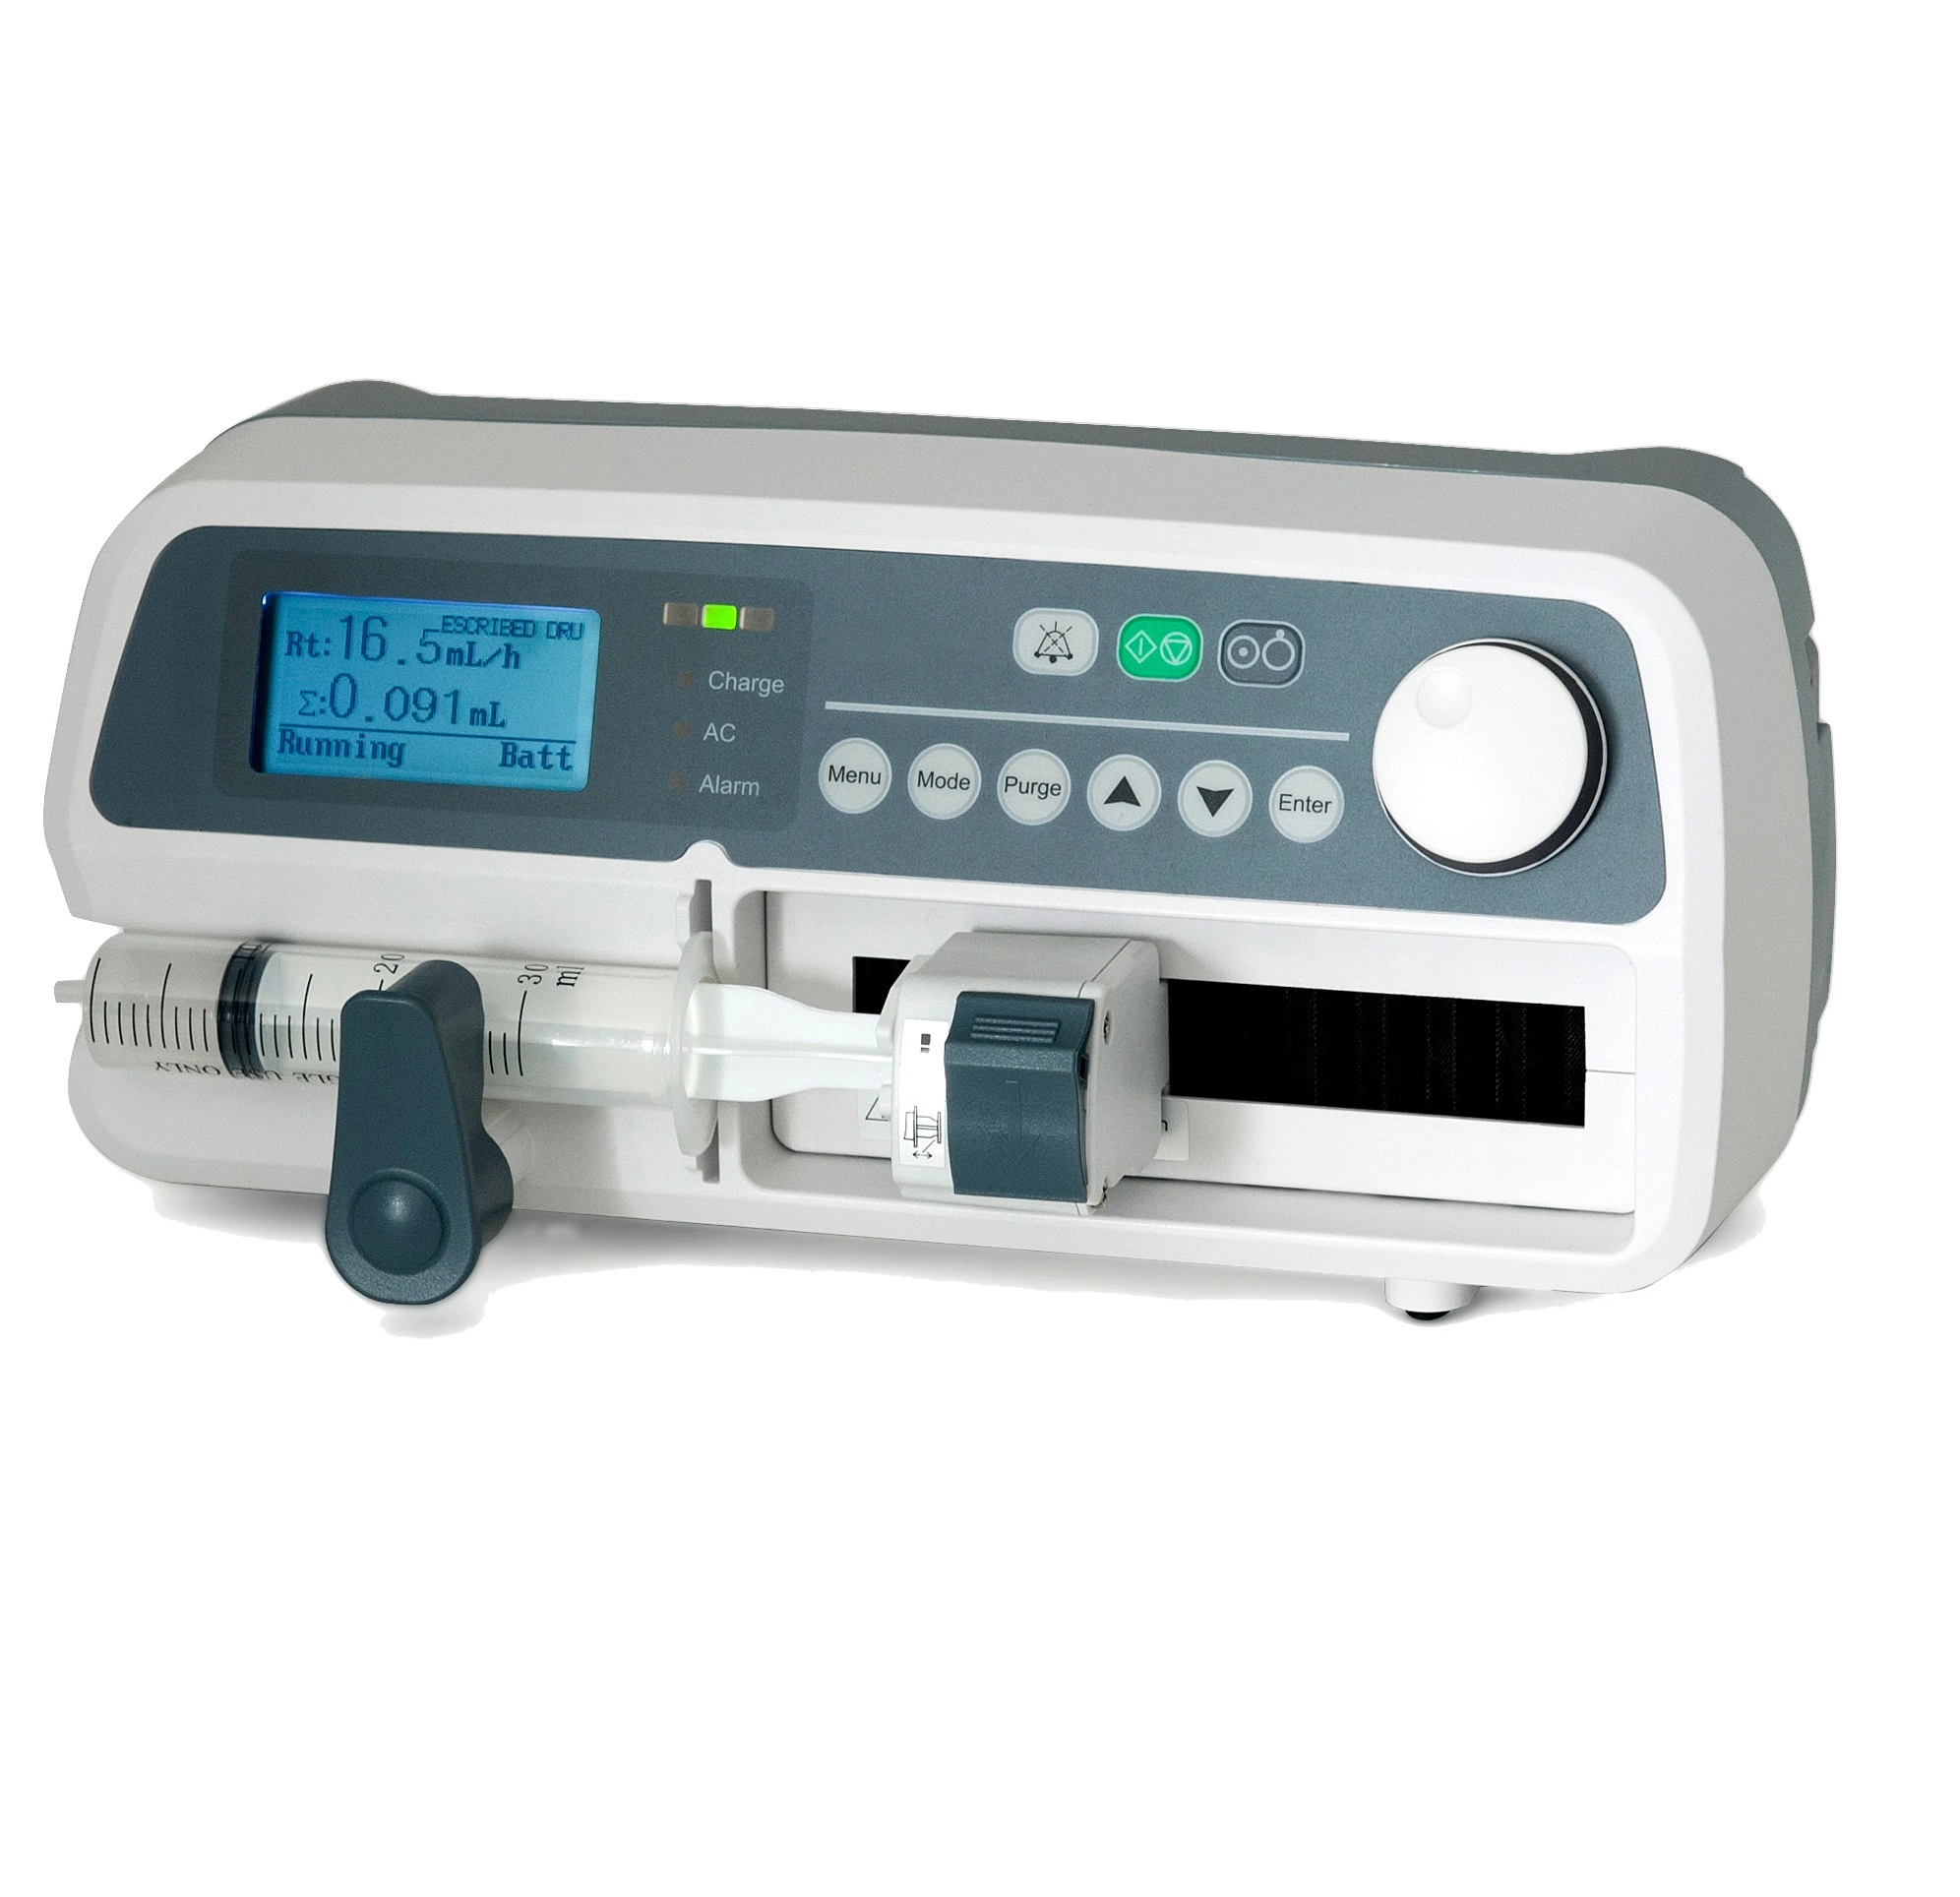 Syringe Pump Am-602 ICU Medical Equipment Manufacturer Portable Micro Volume Pump Syringe Driver with Ce, ISO